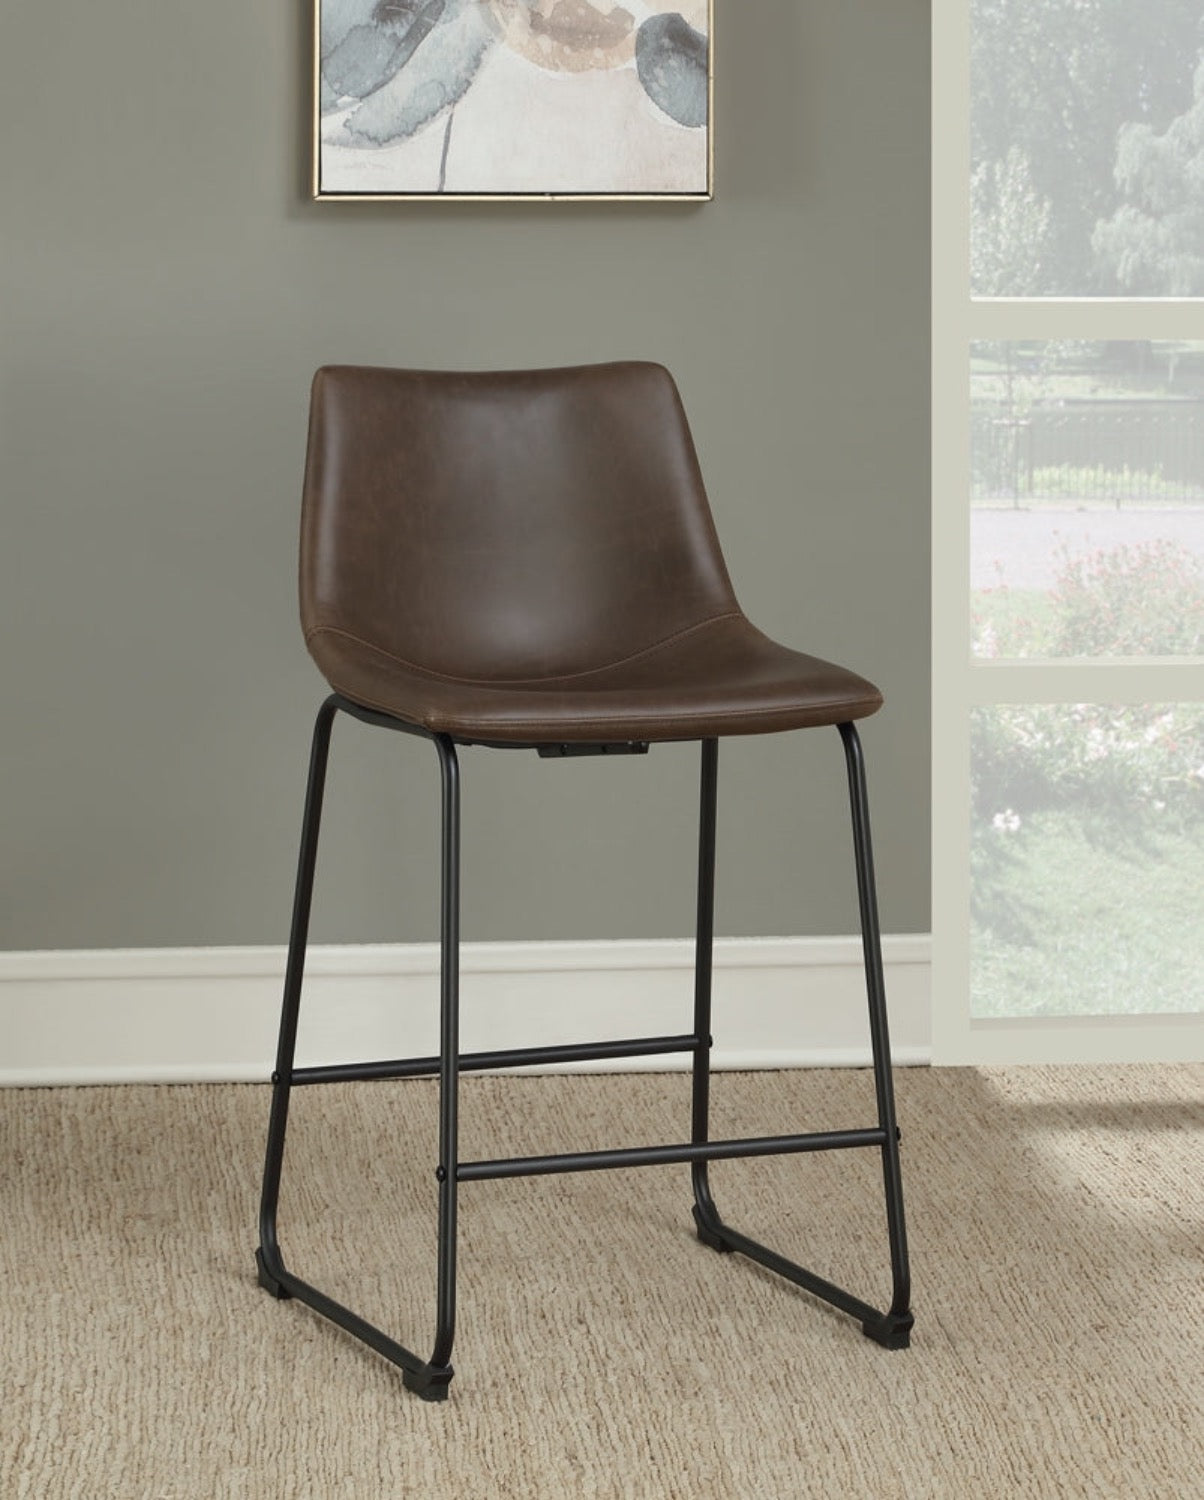 Armless Counter Height Stools Two-Tone Brown And Black Set Of 2